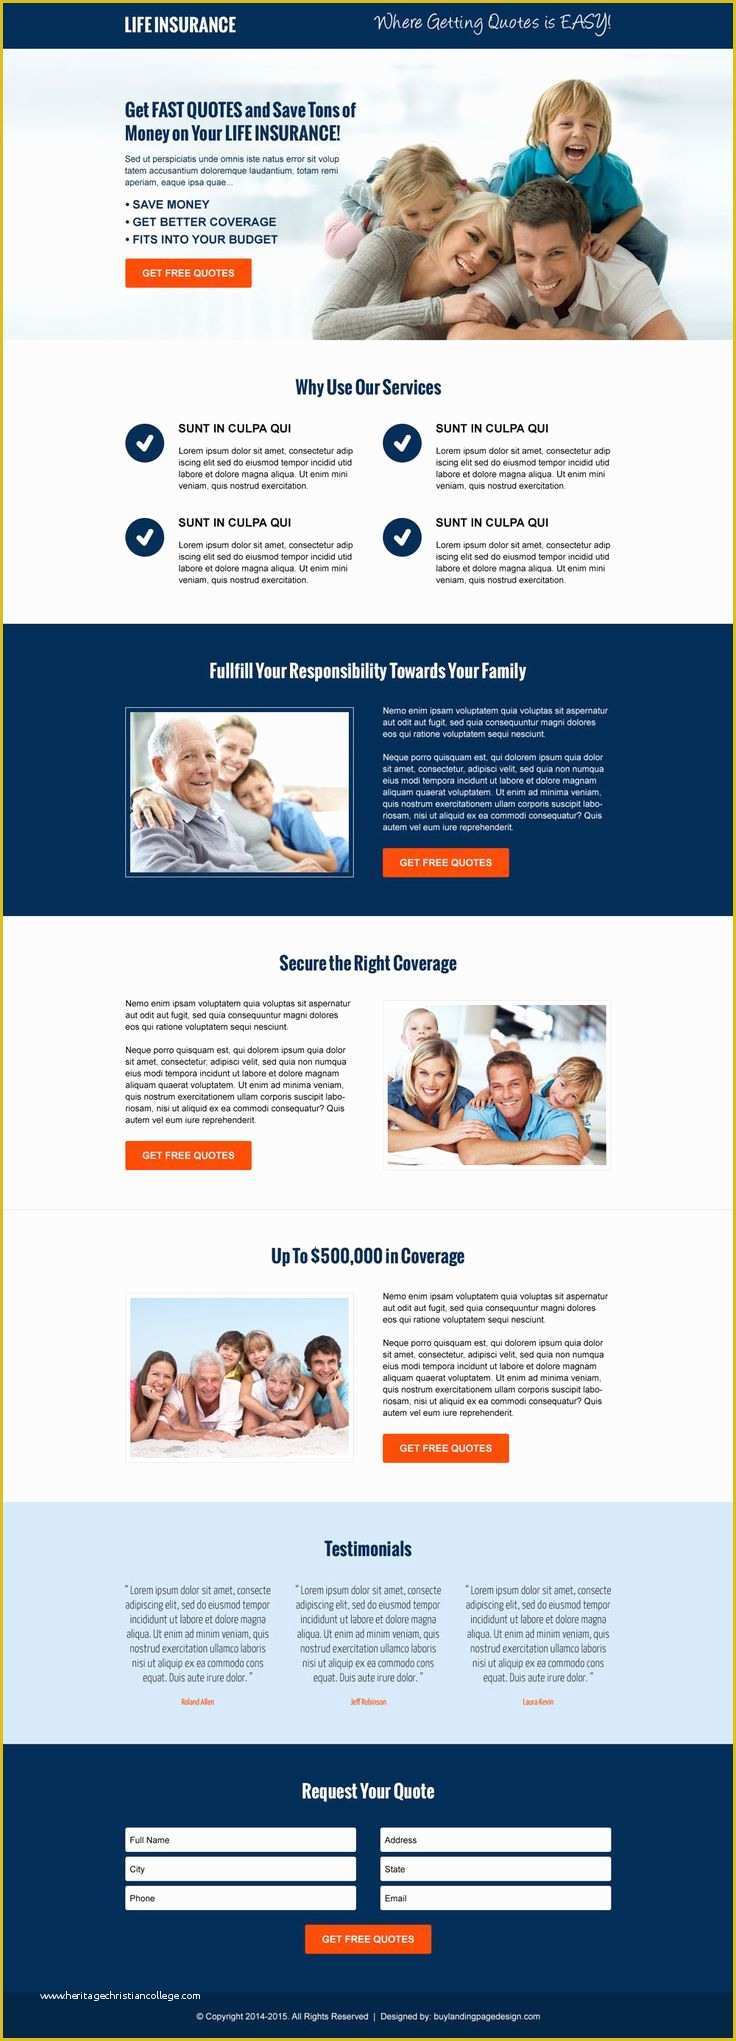 Free Lead Capture Page Templates Of 81 Best Life Insurance Landing Page Design Images On